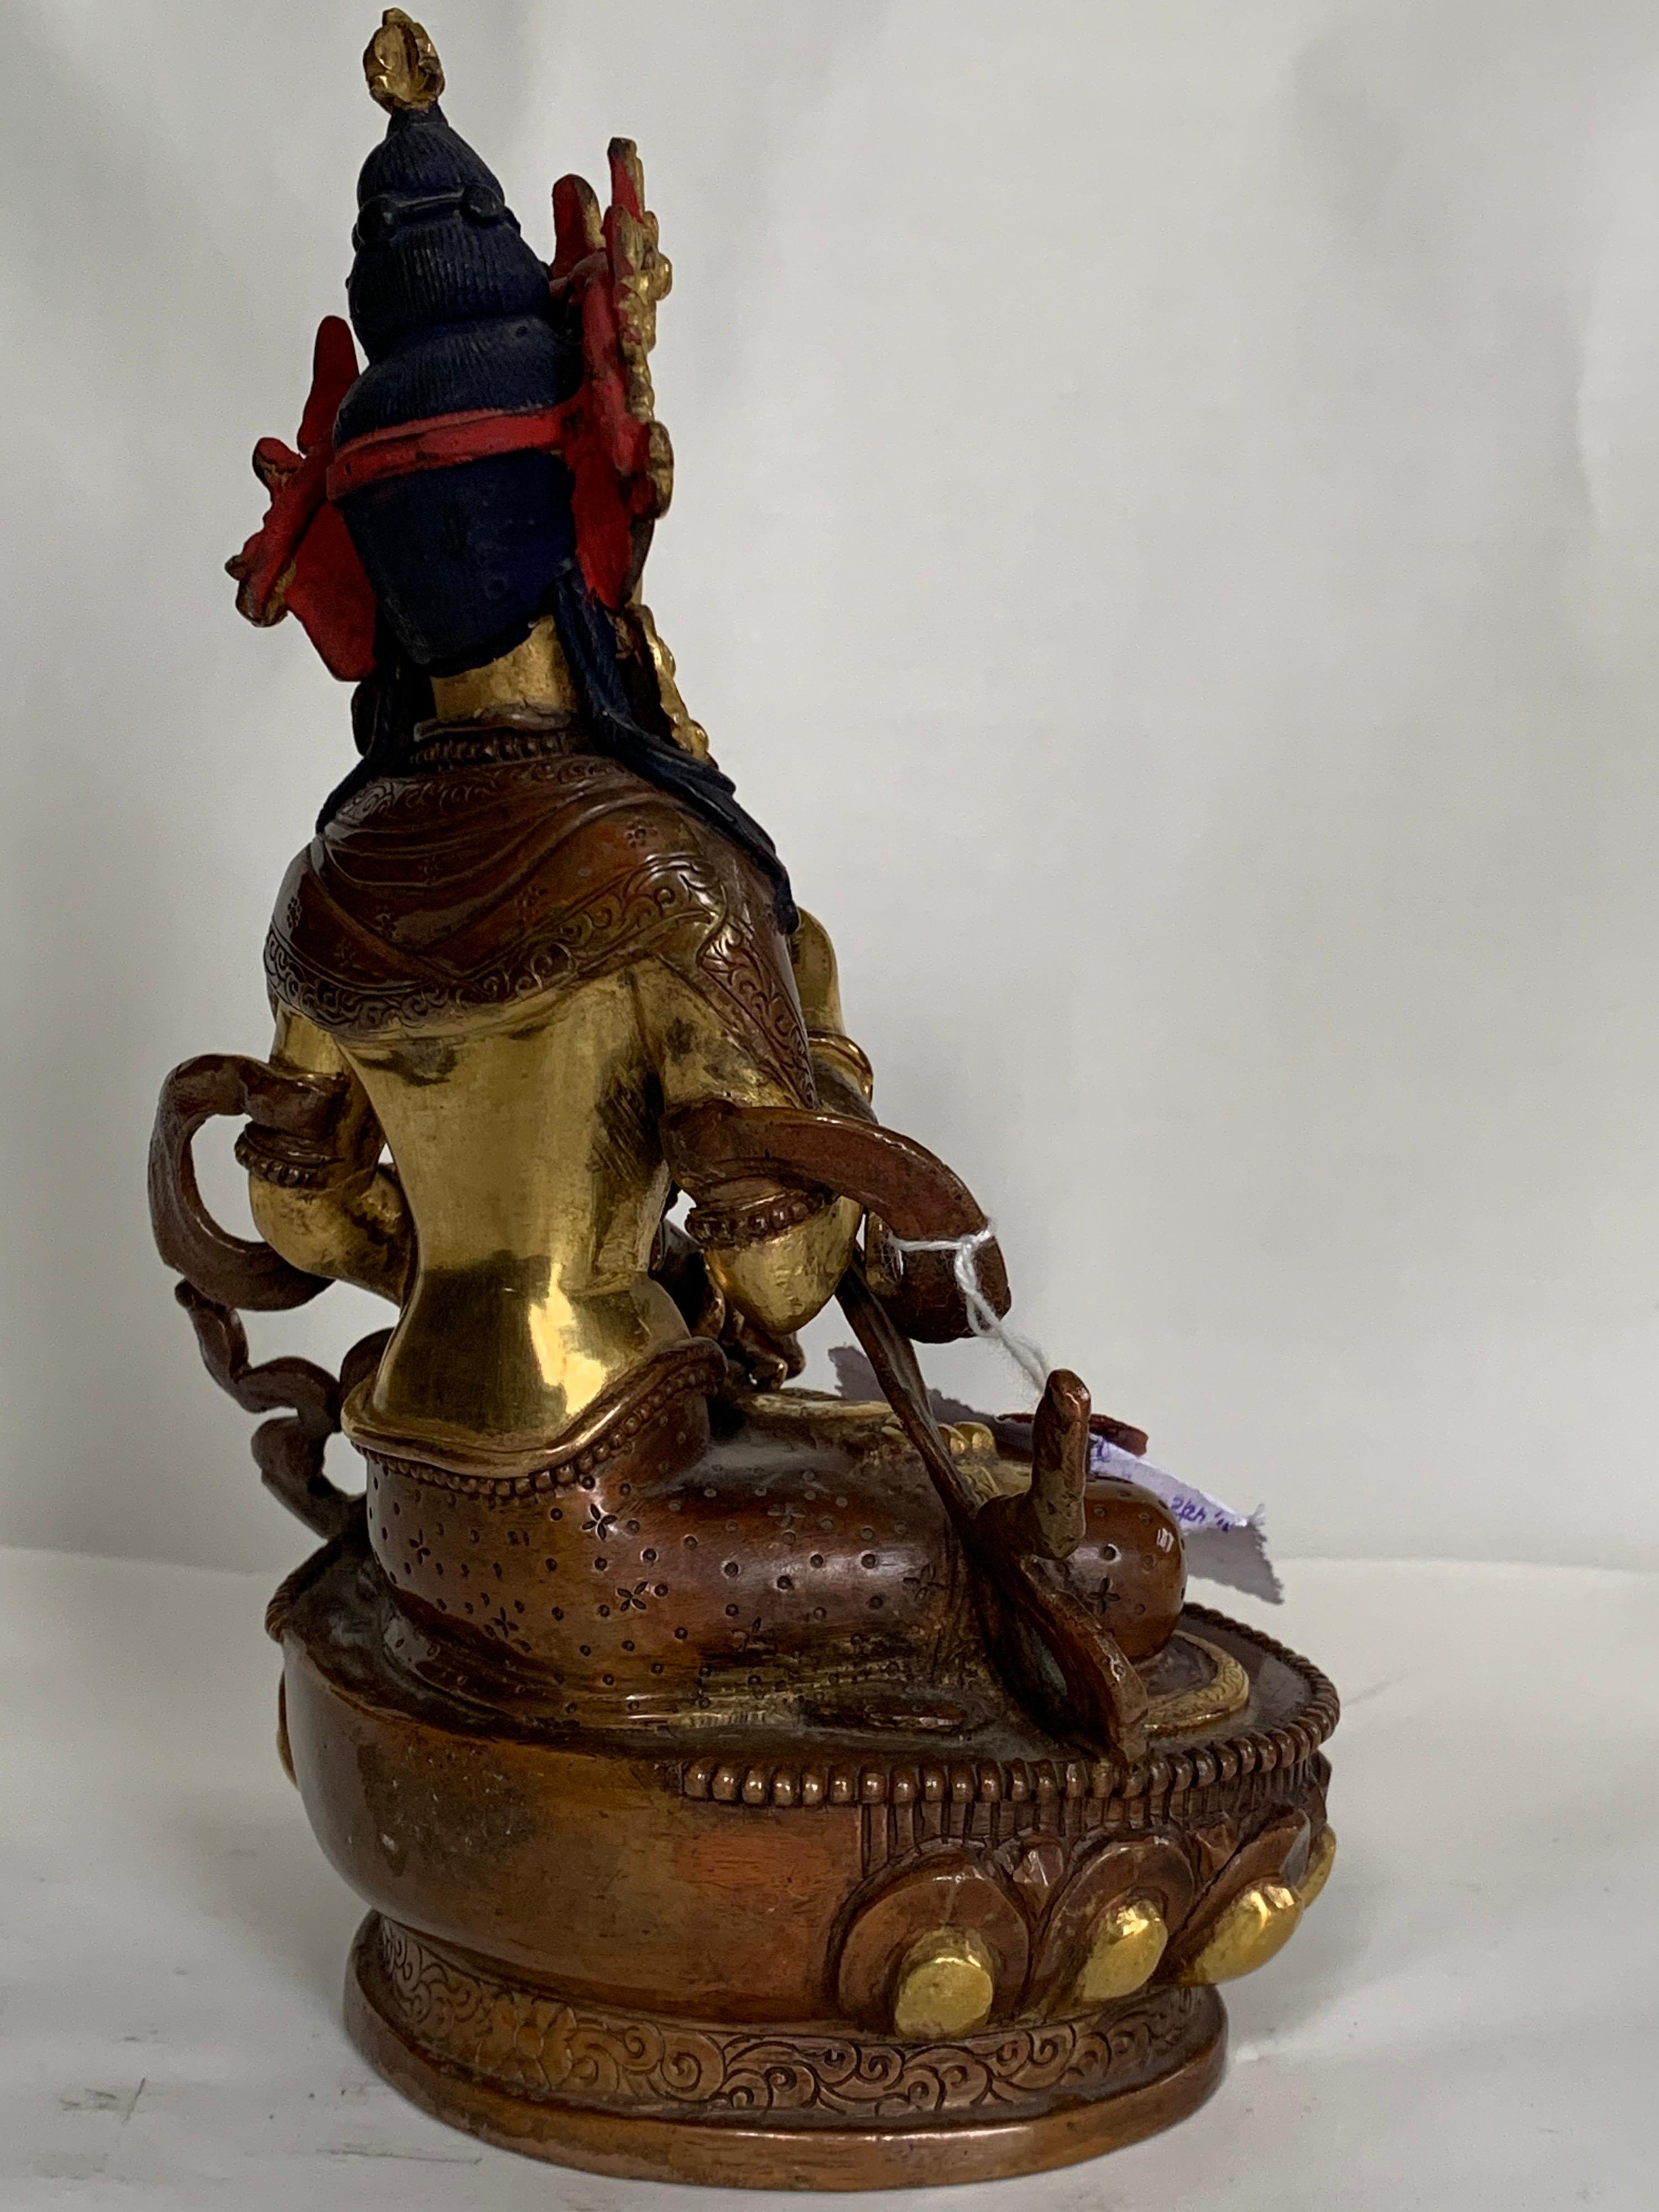 Vajrasattva Statue 7.5 Inch with 24K Gold Handcrafted by Lost Wax Process - Abstract Sculpture by Unknown